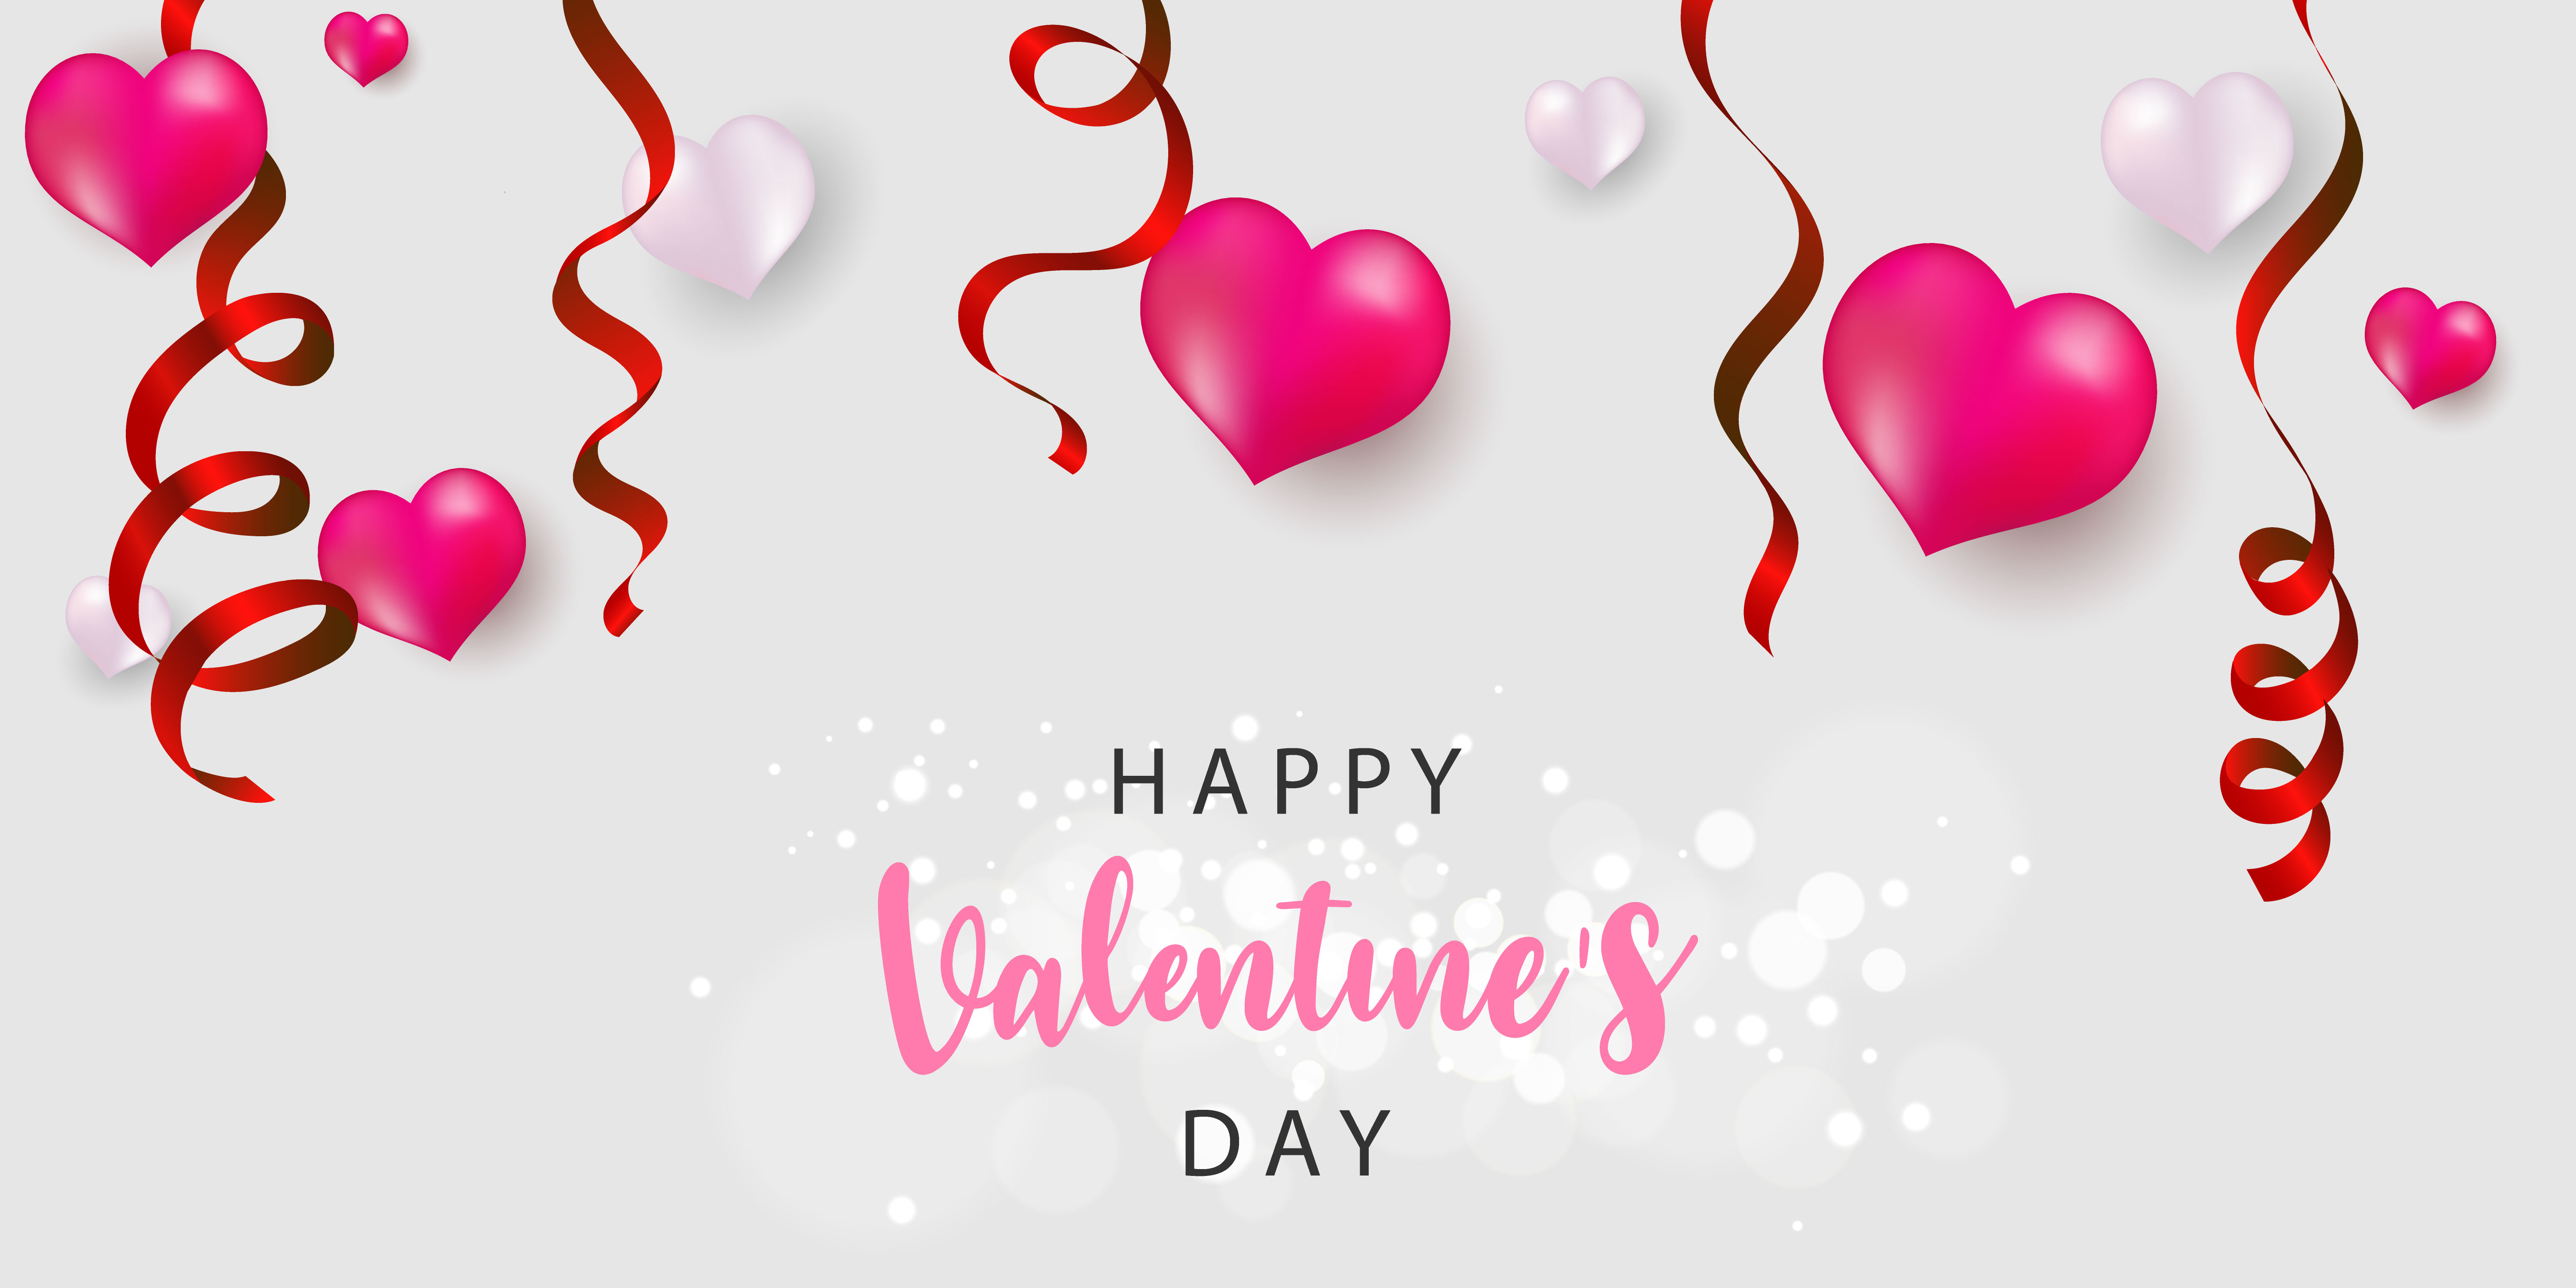 Valentine's day banner template - Download Free Vectors, Clipart